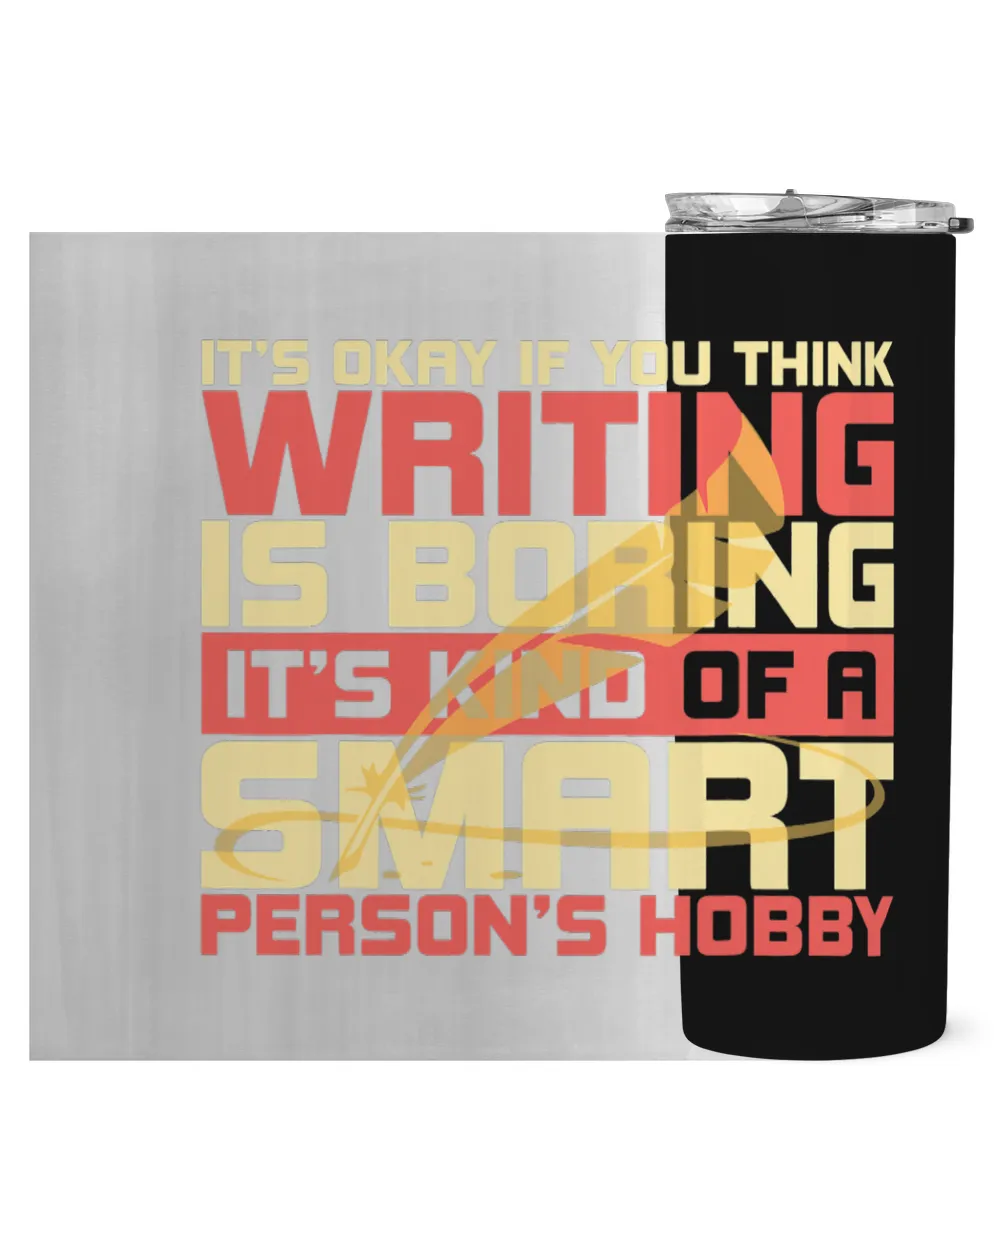 Author Writer Writing Is Boring Its A Smart Persons Hobby